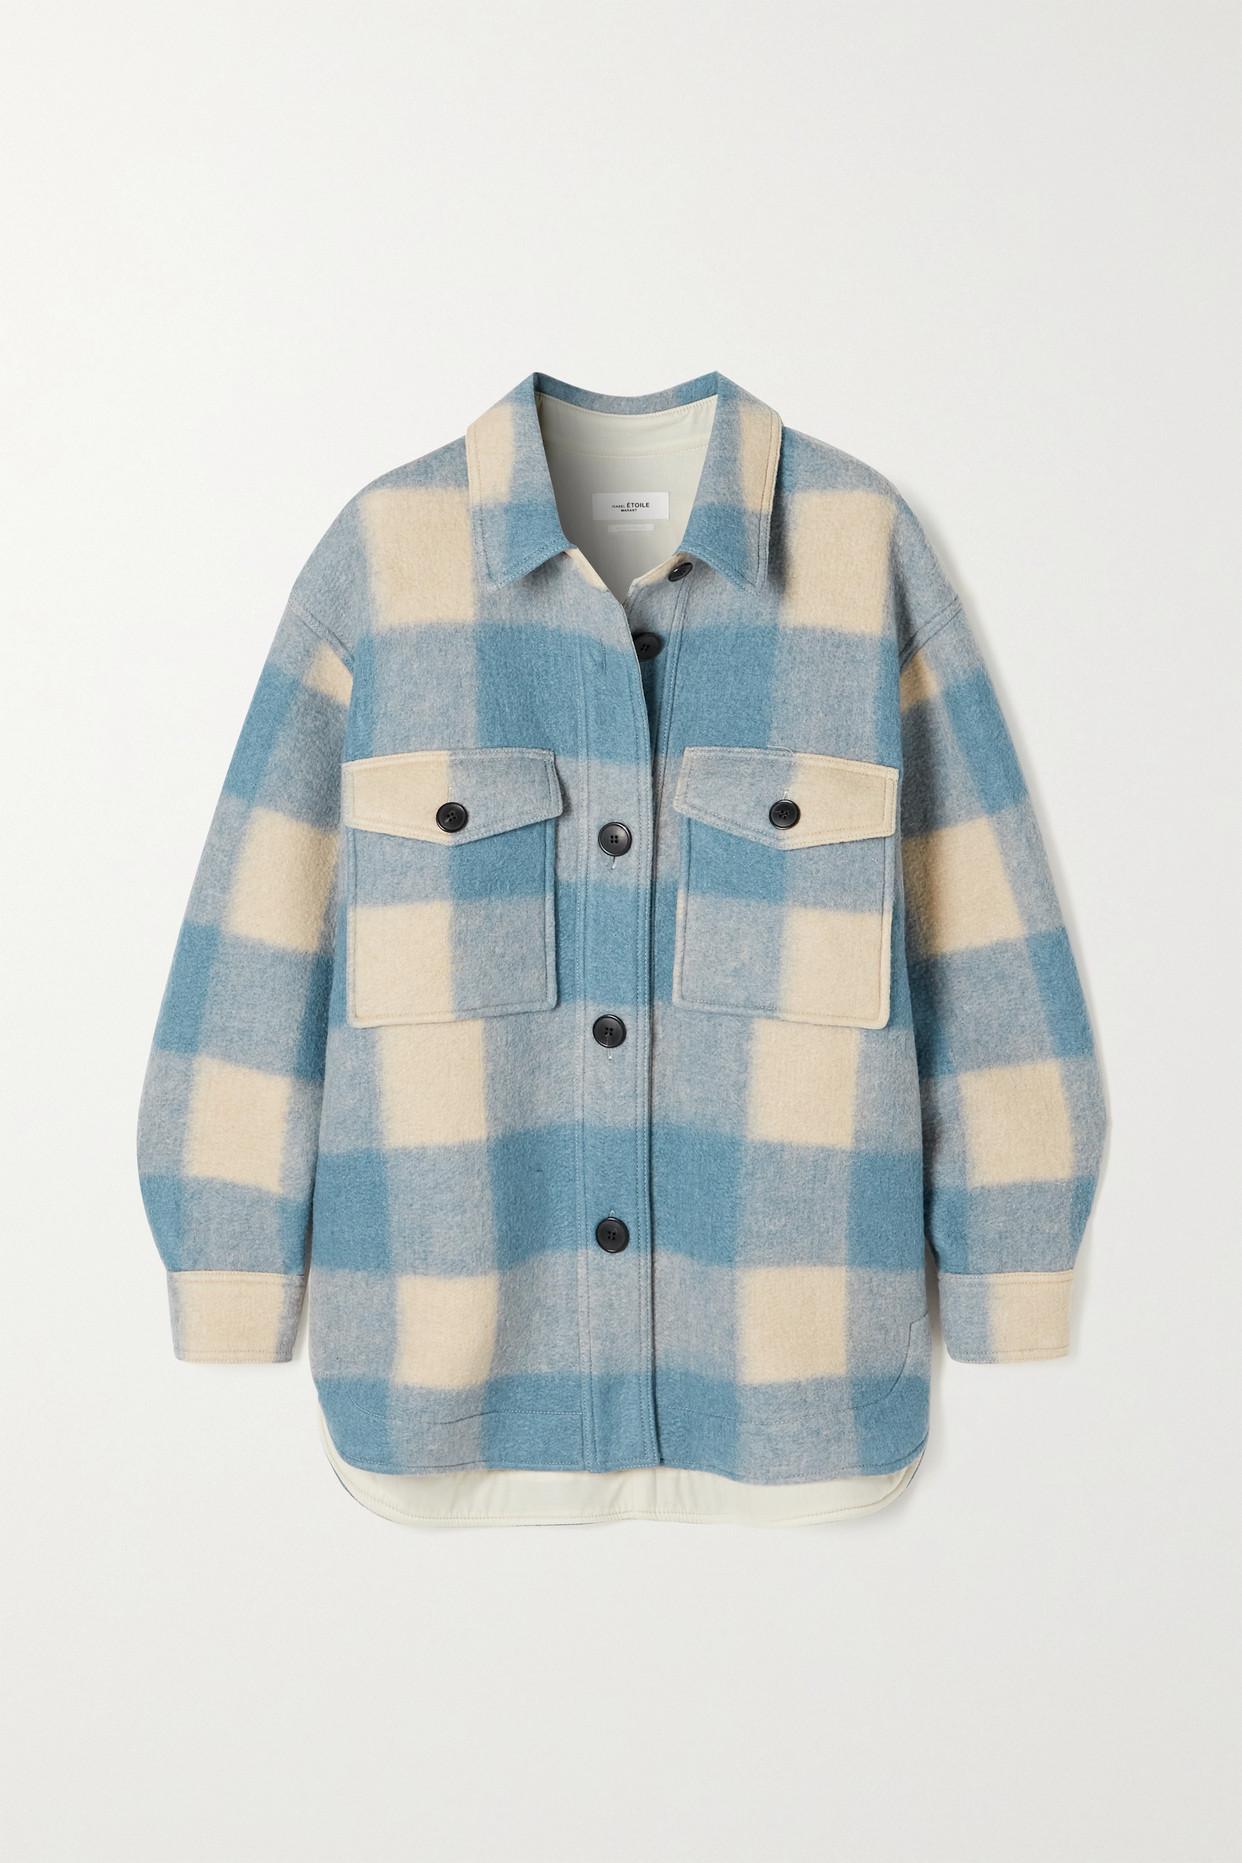 Étoile Isabel Marant Harveli Checked Flannel Jacket in Blue | Lyst